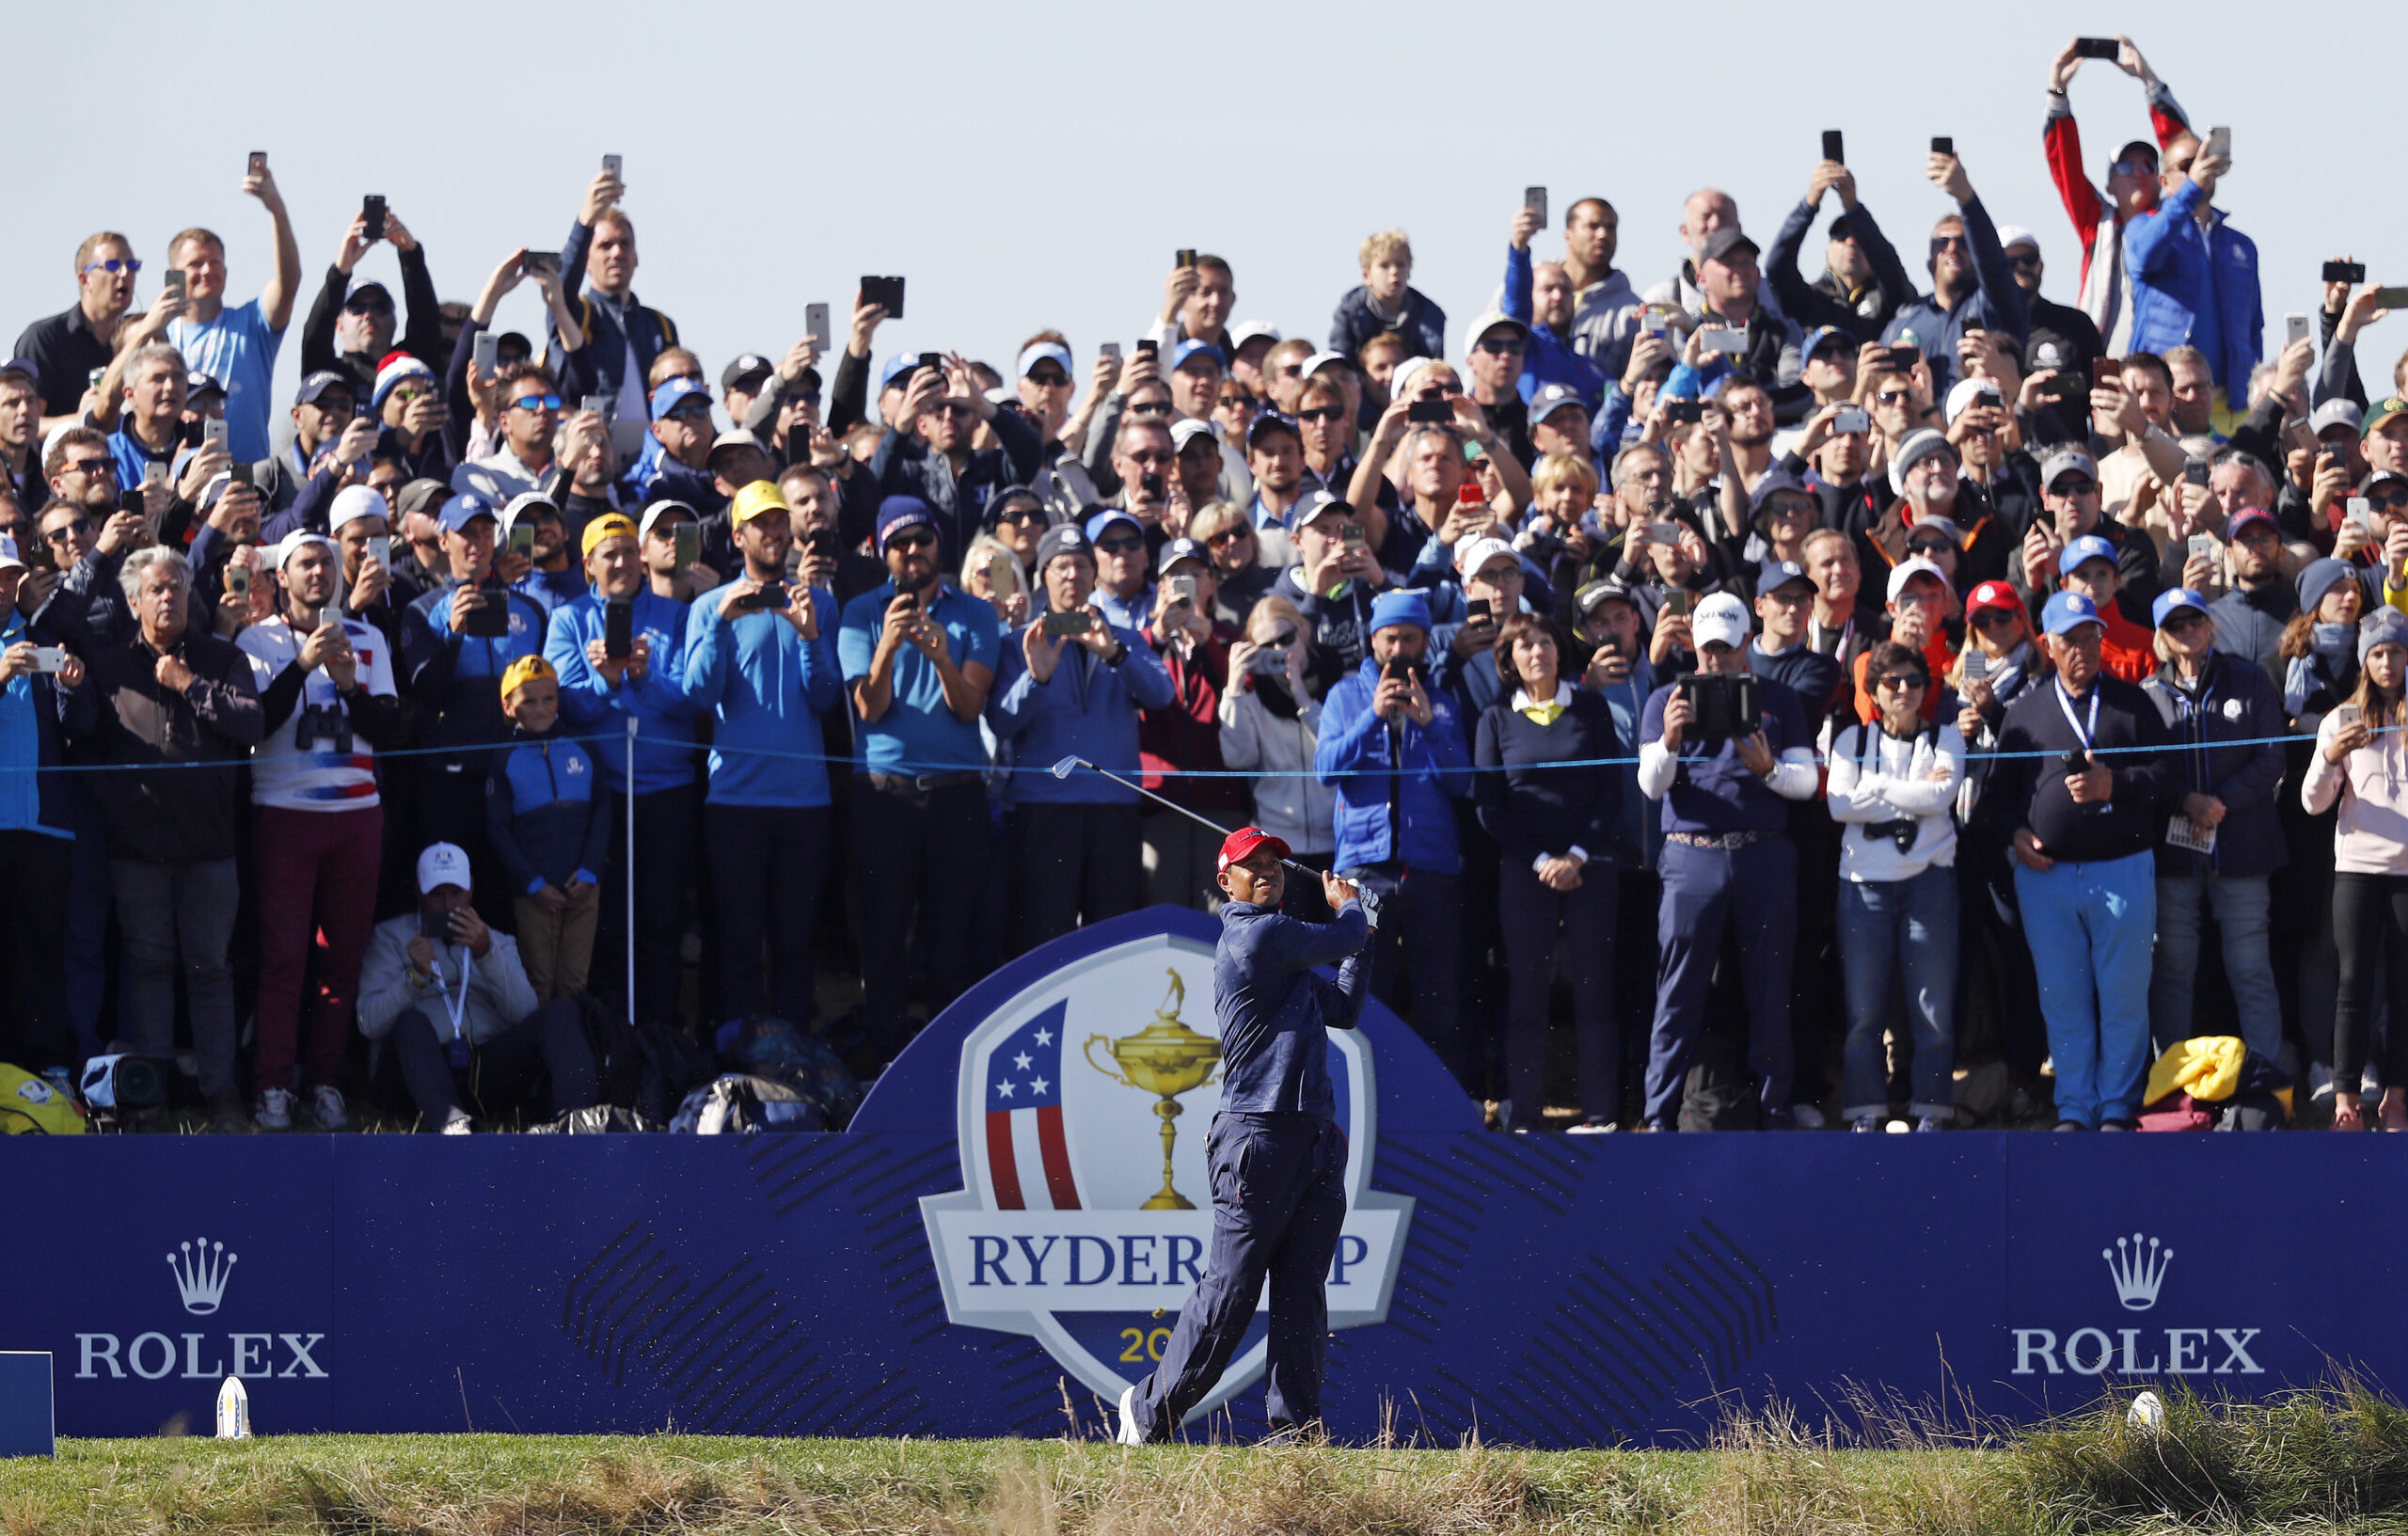 Tiger Woods of the United States plays at the 42nd Ryder Cup